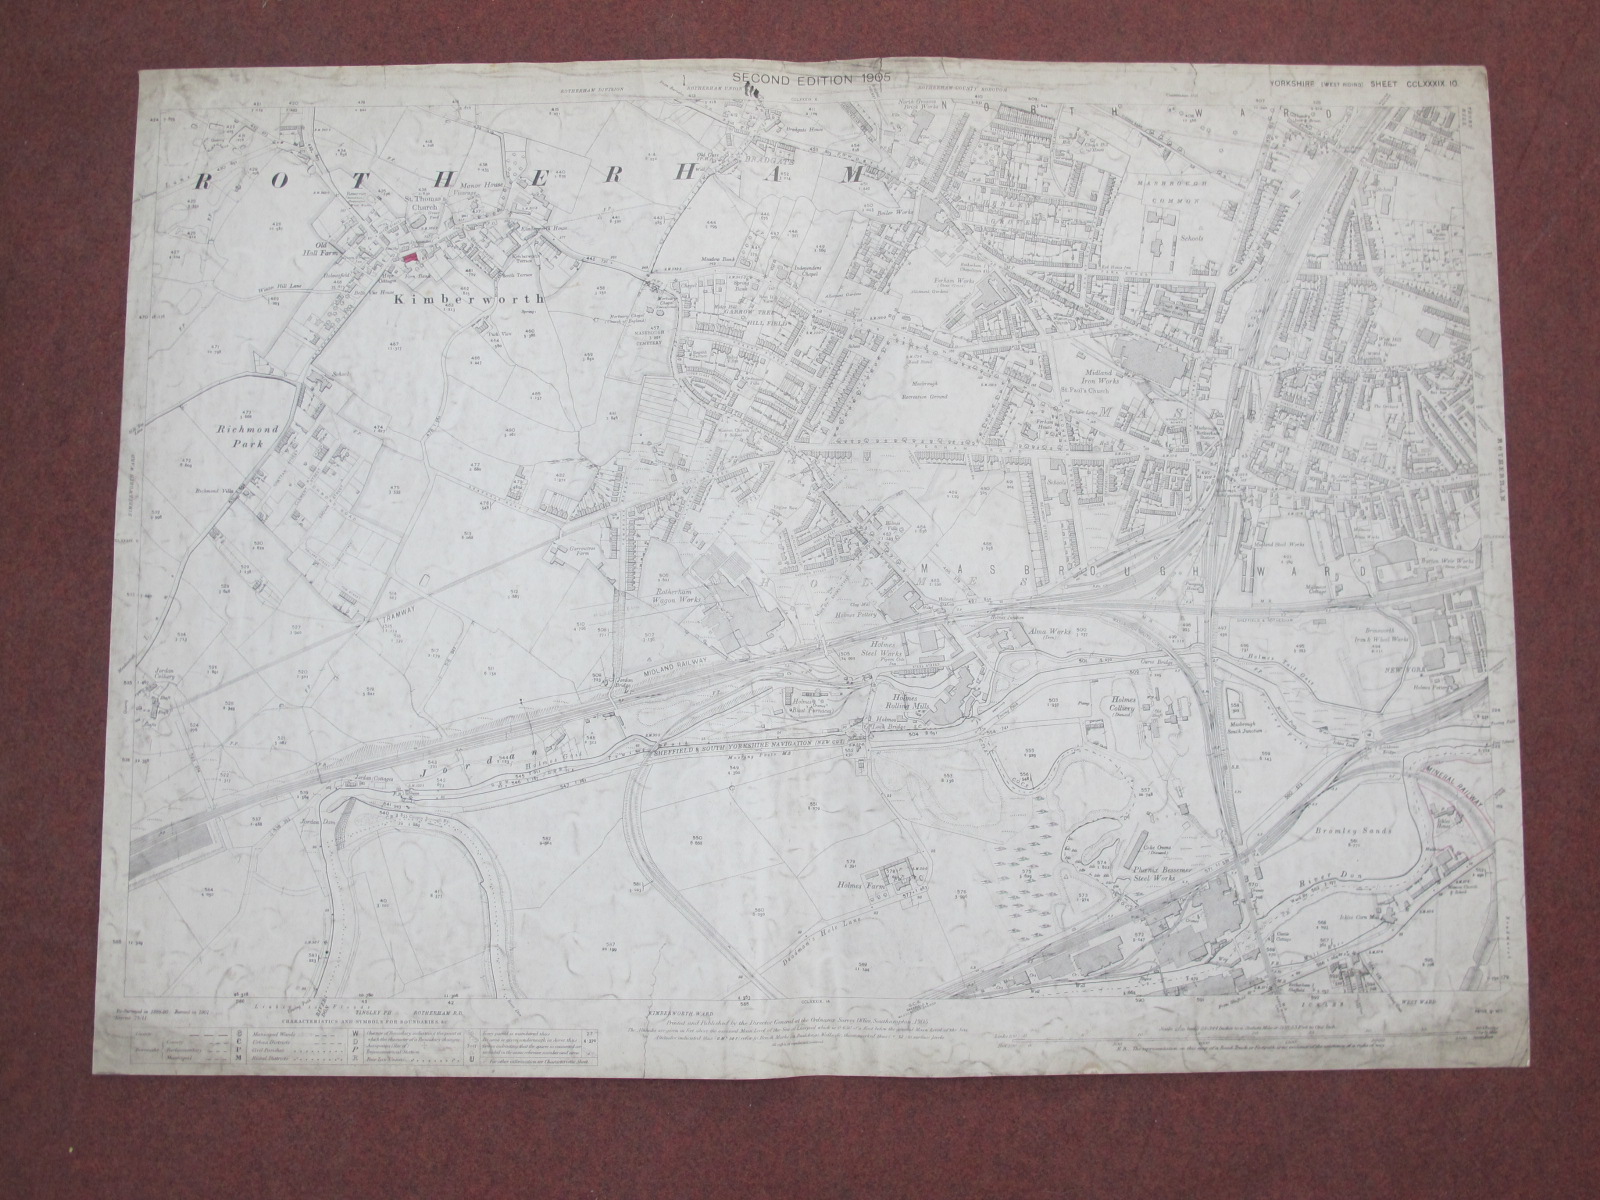 West Riding Yorkshire Maps, Rotherham and area - some dates noted 1903, 1905, 1929, various - Image 6 of 10